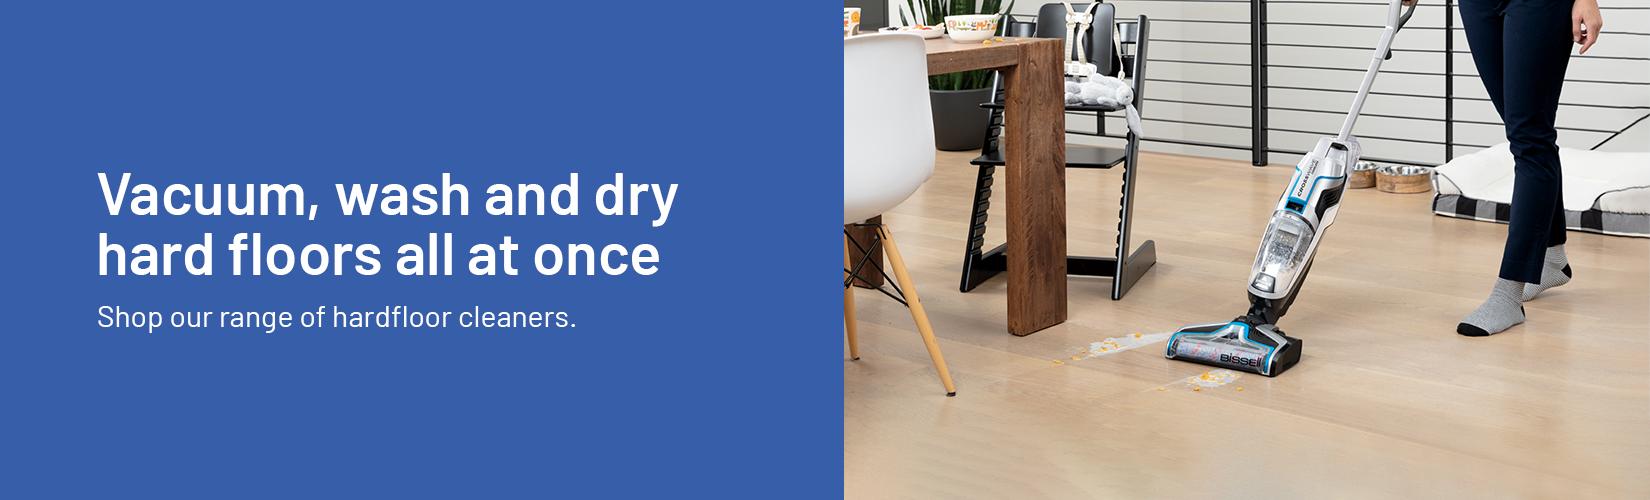 Vacuum, wash and dry hard floors all at once. Shop our range of hardfloor cleaners.